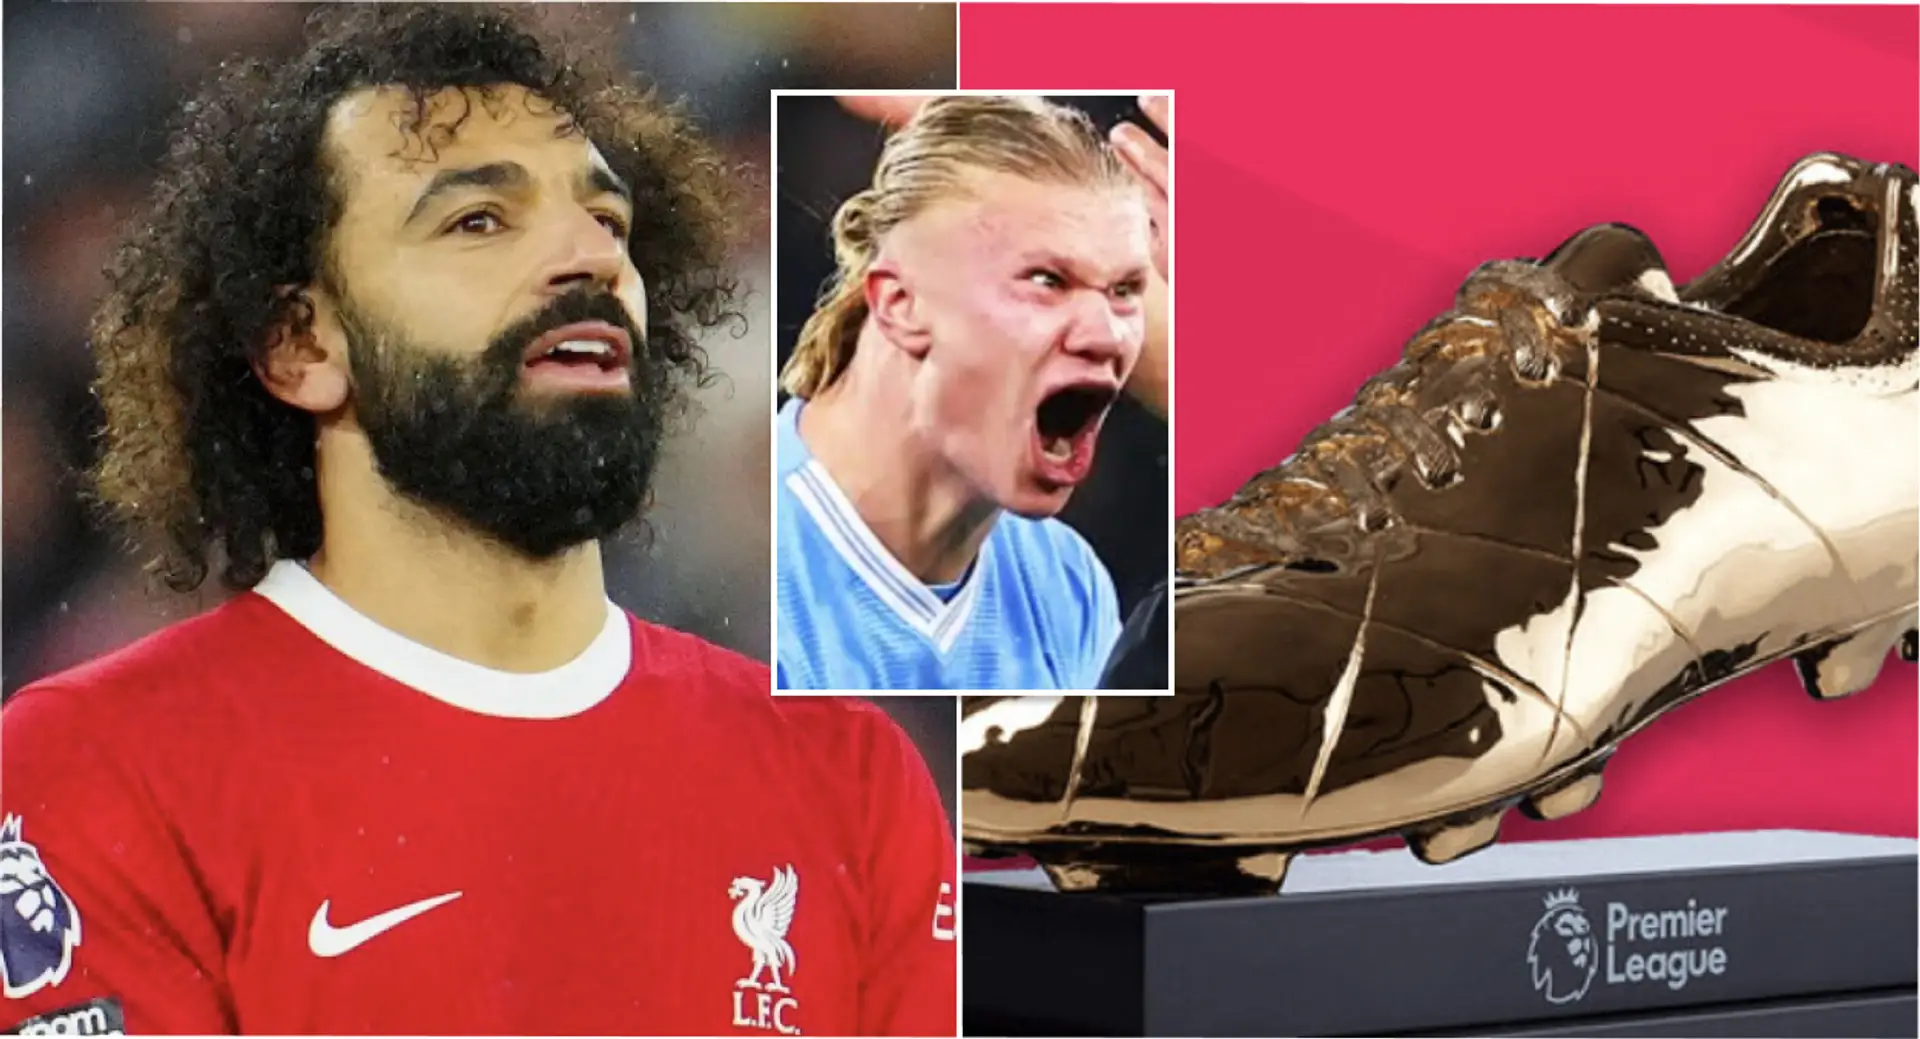 Premier League Golden Boot race still on: where does Mo Salah stand?